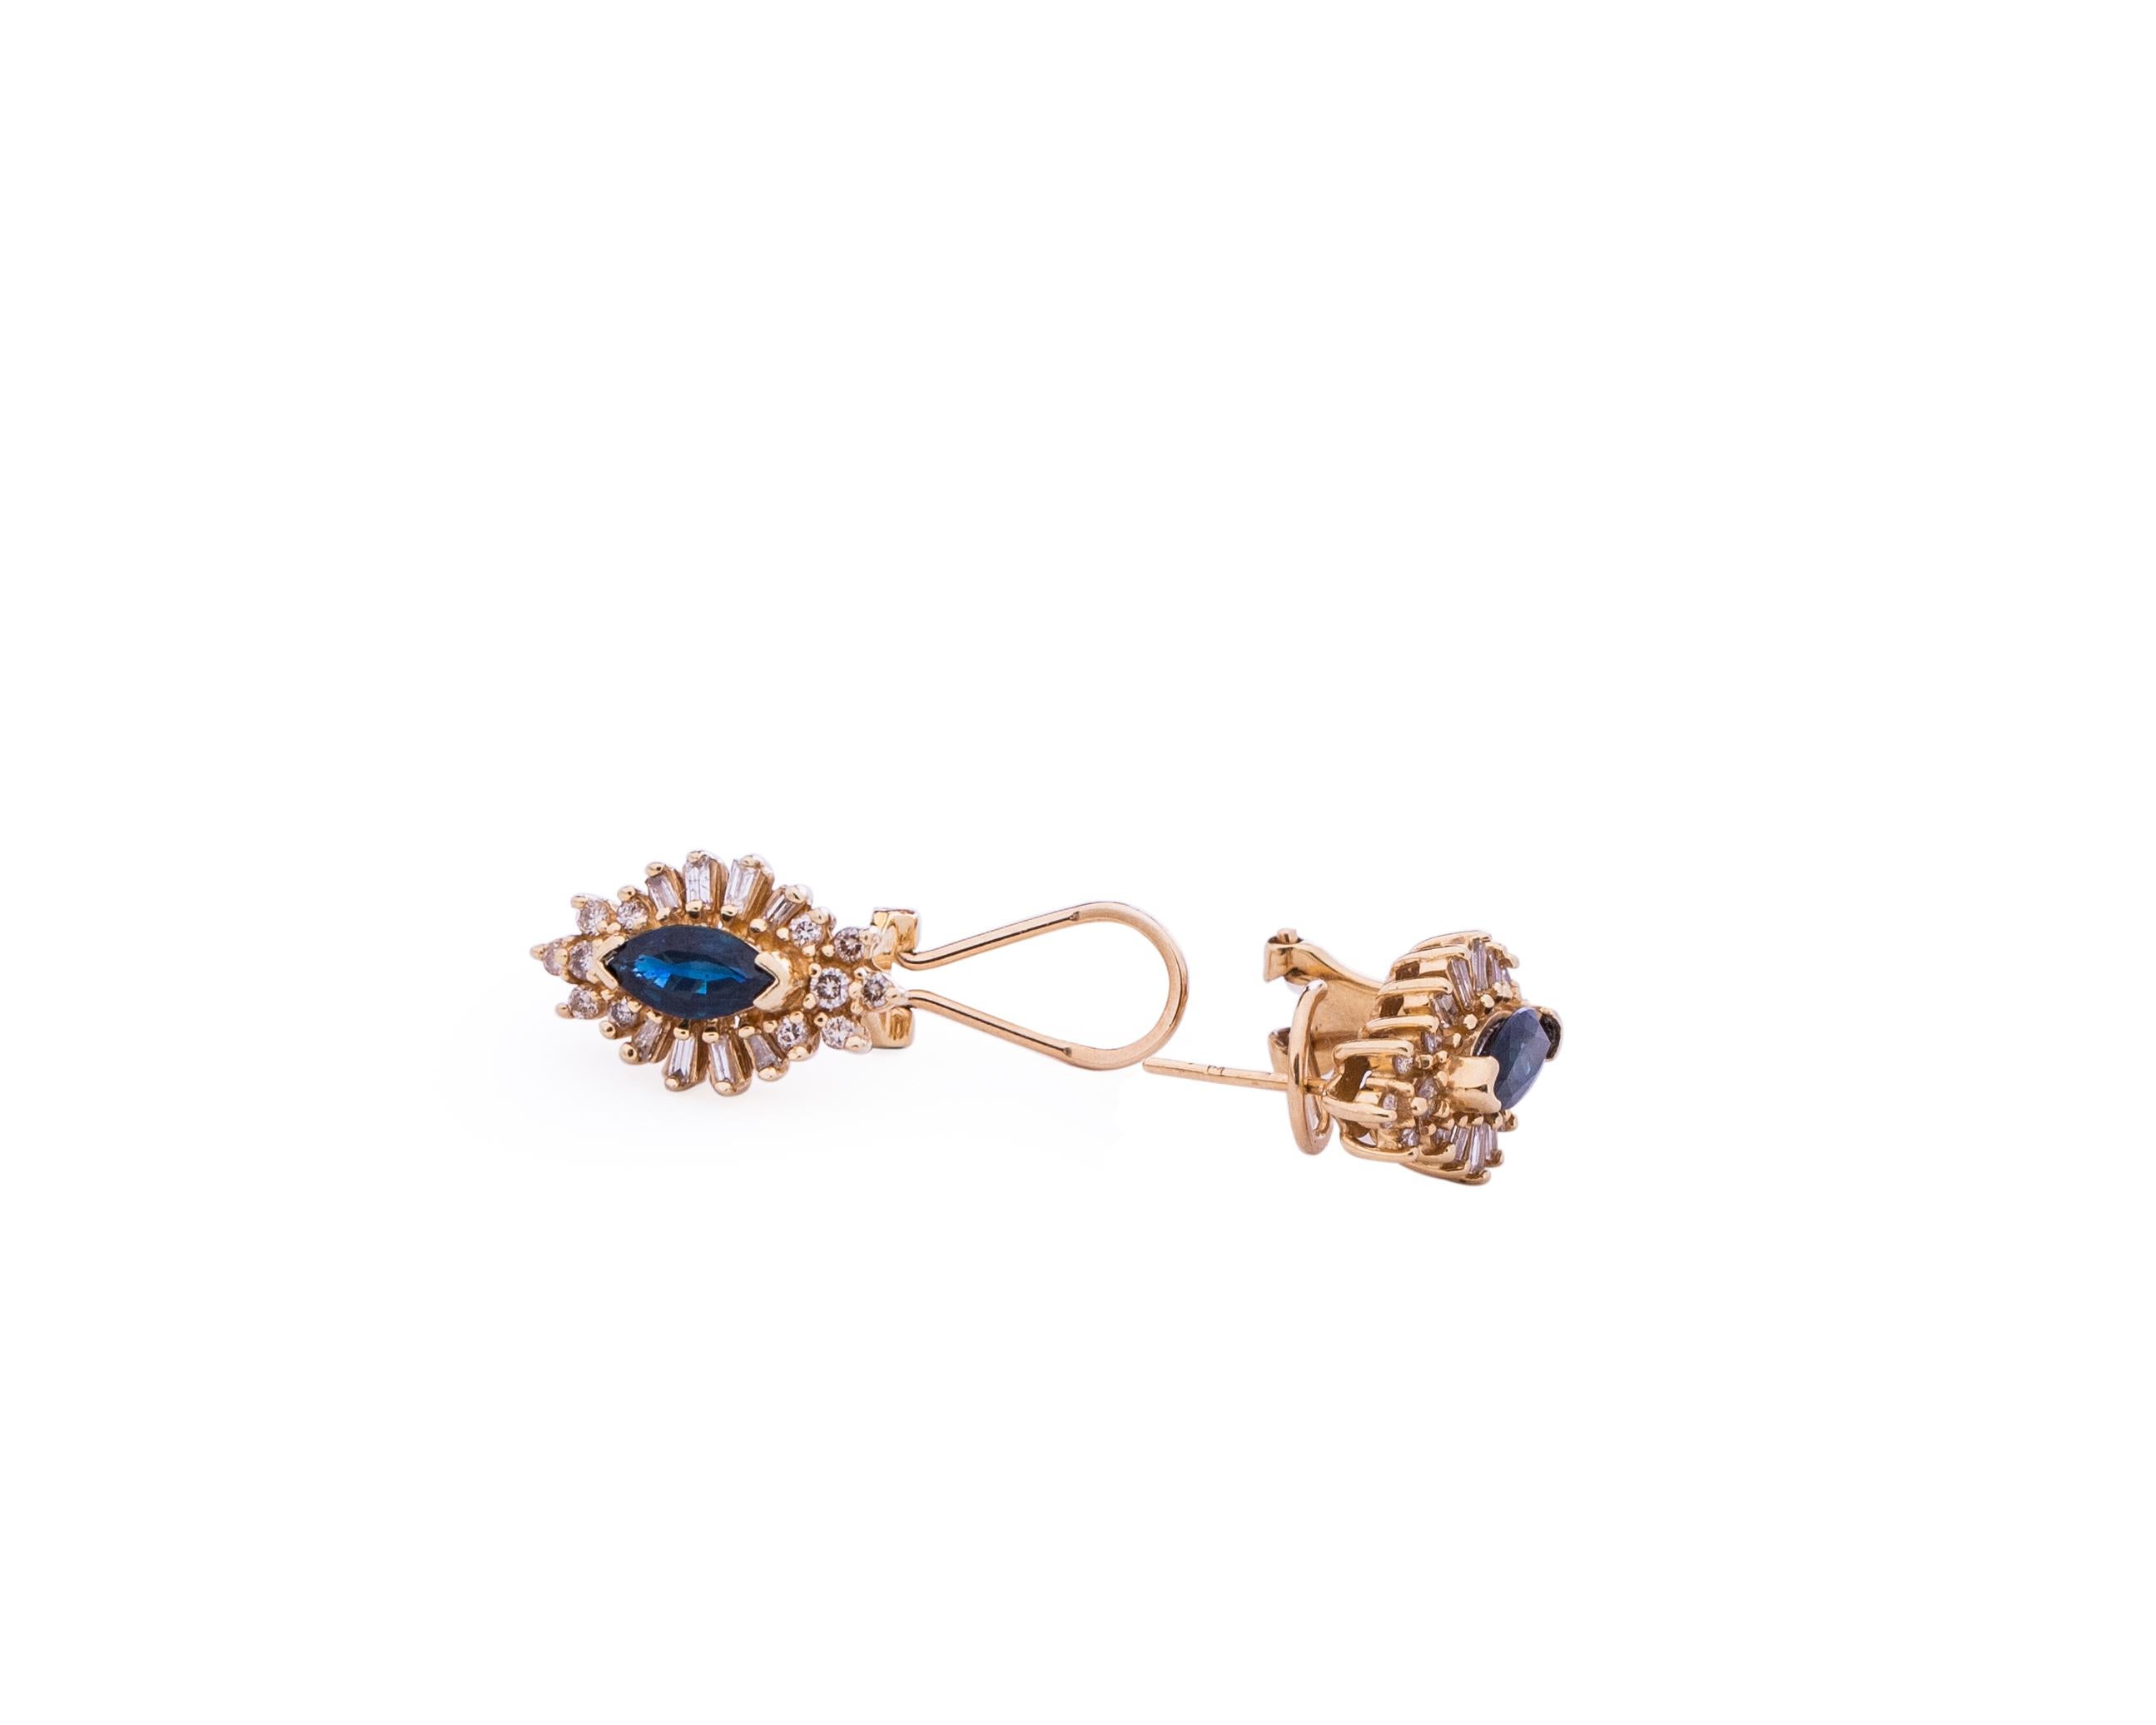 Stunning retro vintage earrings from the 1970s! These feature a beautiful royal blue marquise sapphire in the center, v-prong set. The sapphire is surrounded by an array of diamonds, round and baguette cut. These earrings are crafted in 14 karat